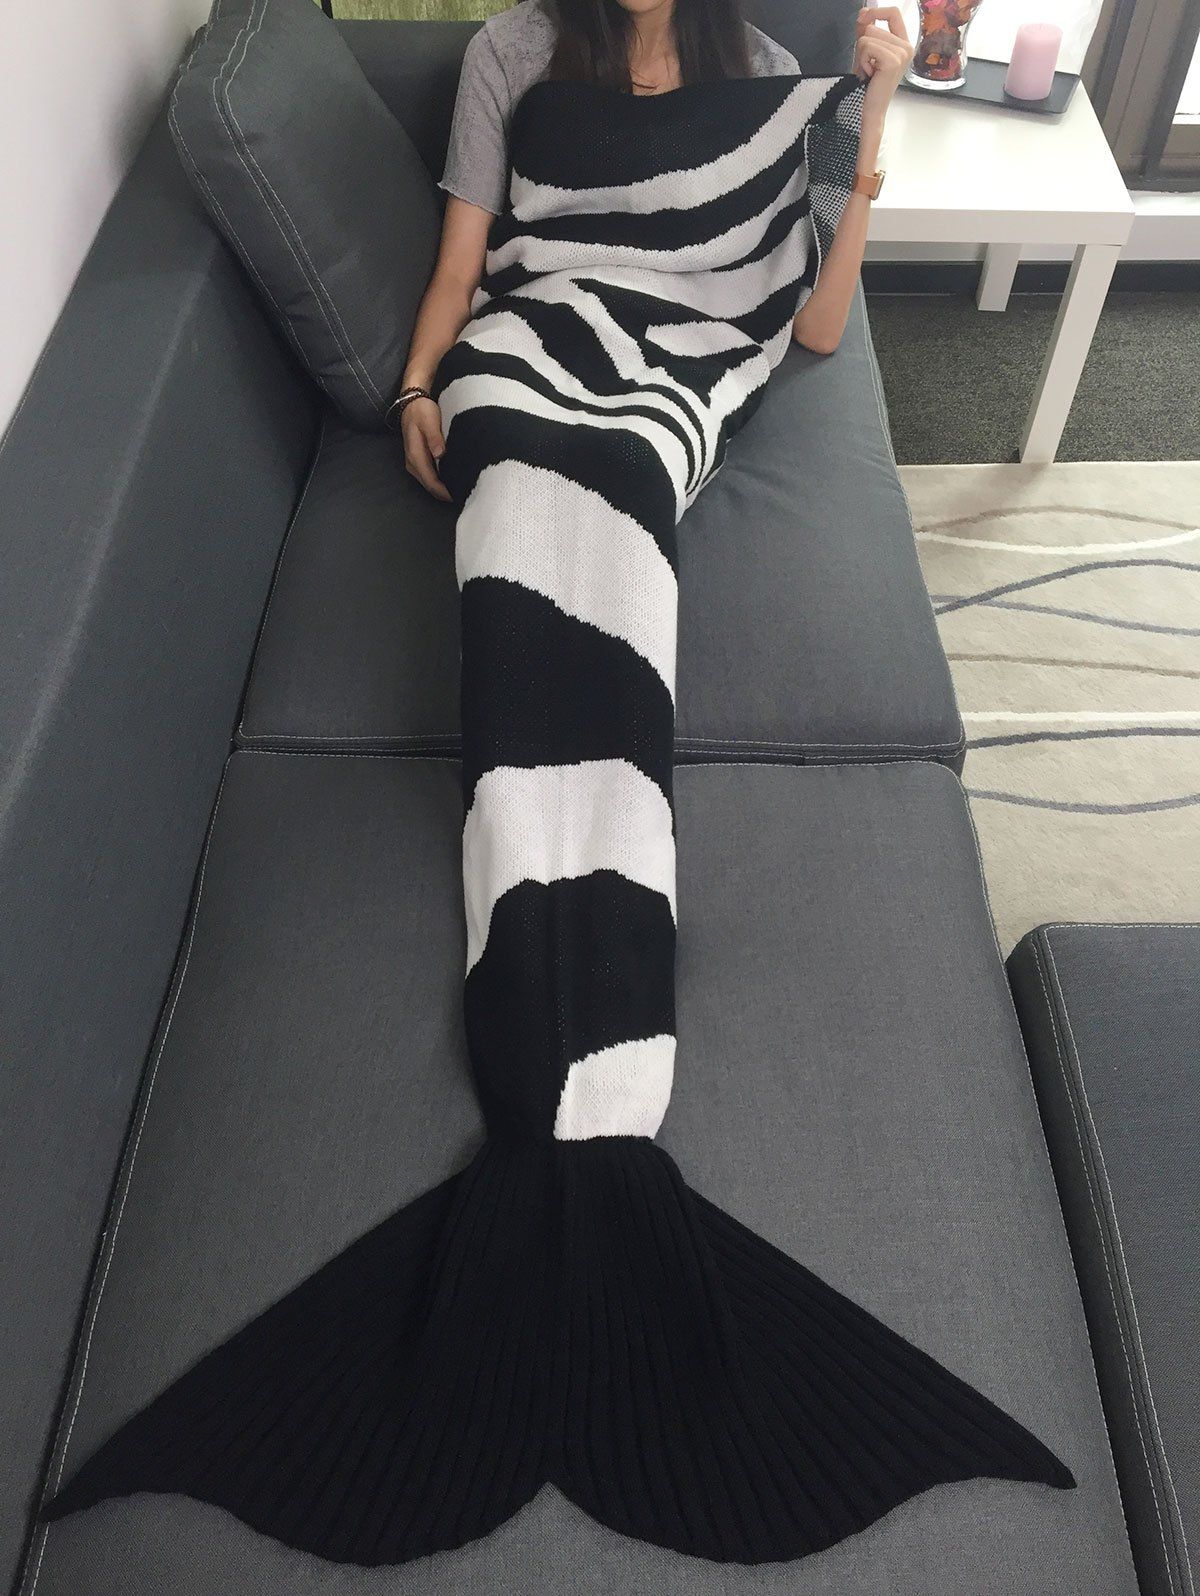 Super Soft Color Block Knitted Mermaid Tail Blanket - WHITE/BLACK 